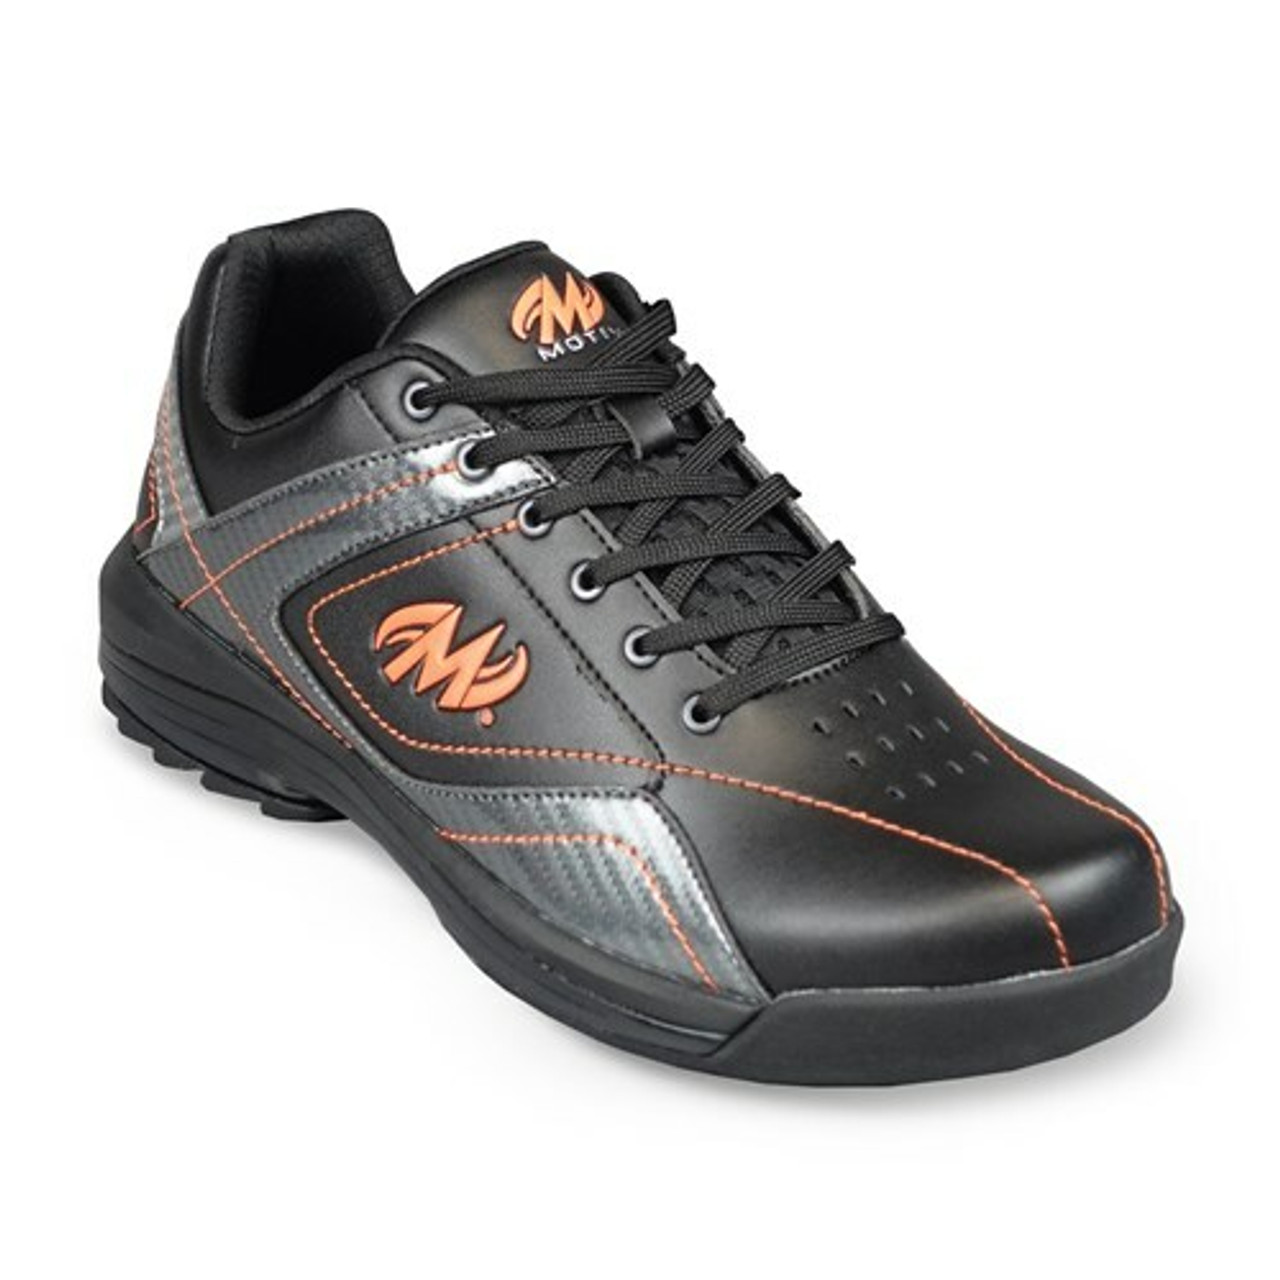 Motiv Propel Men's Bowling Shoes Right Handed WIDE